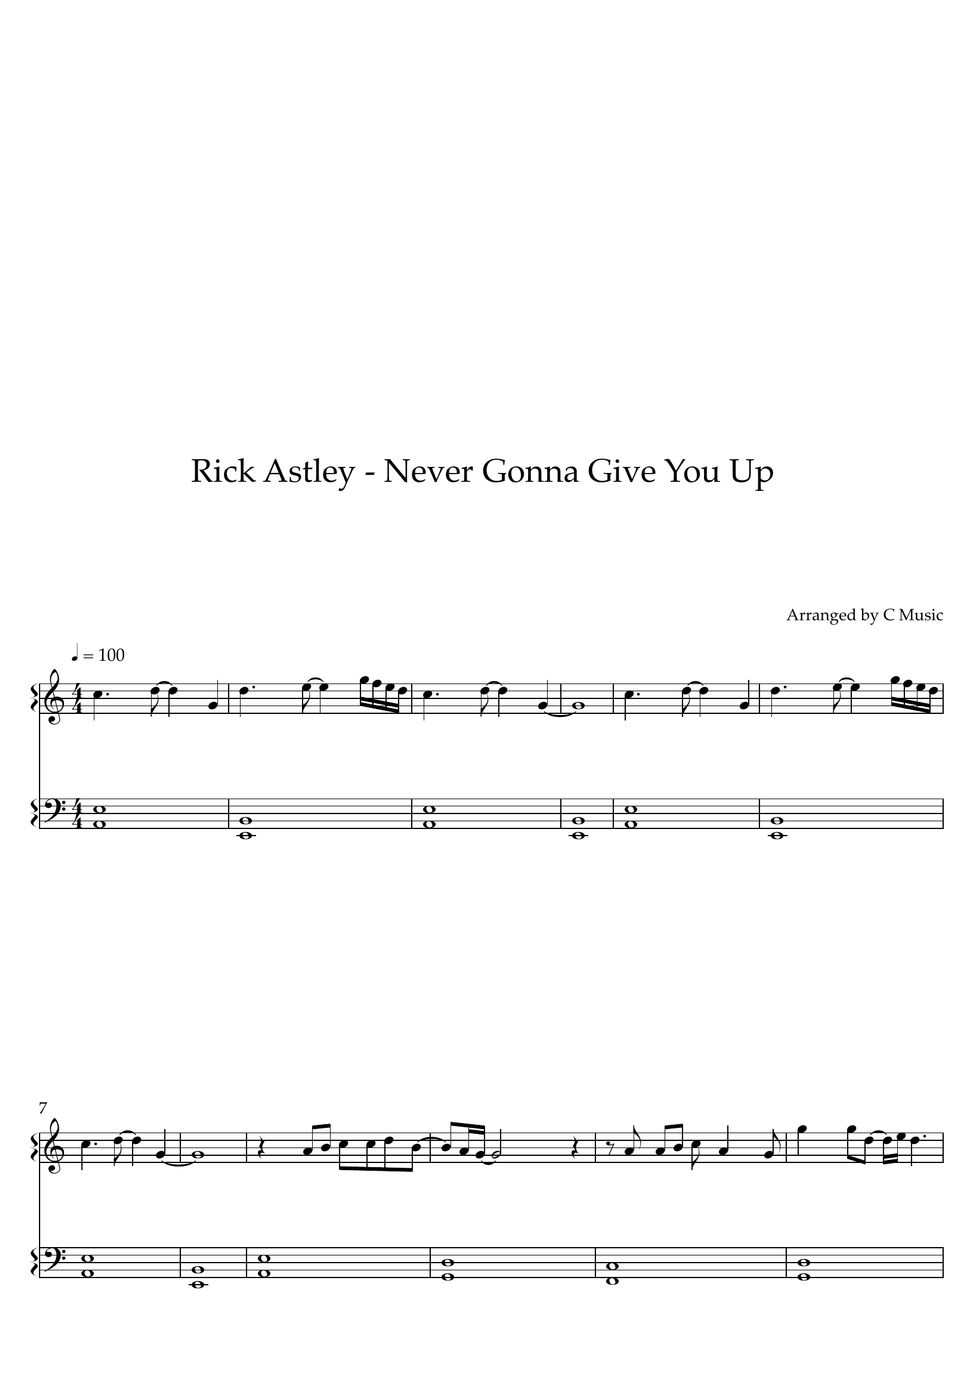 Rick Astley Never Gonna Give You Up Easy Version Spartito By C Music 0641